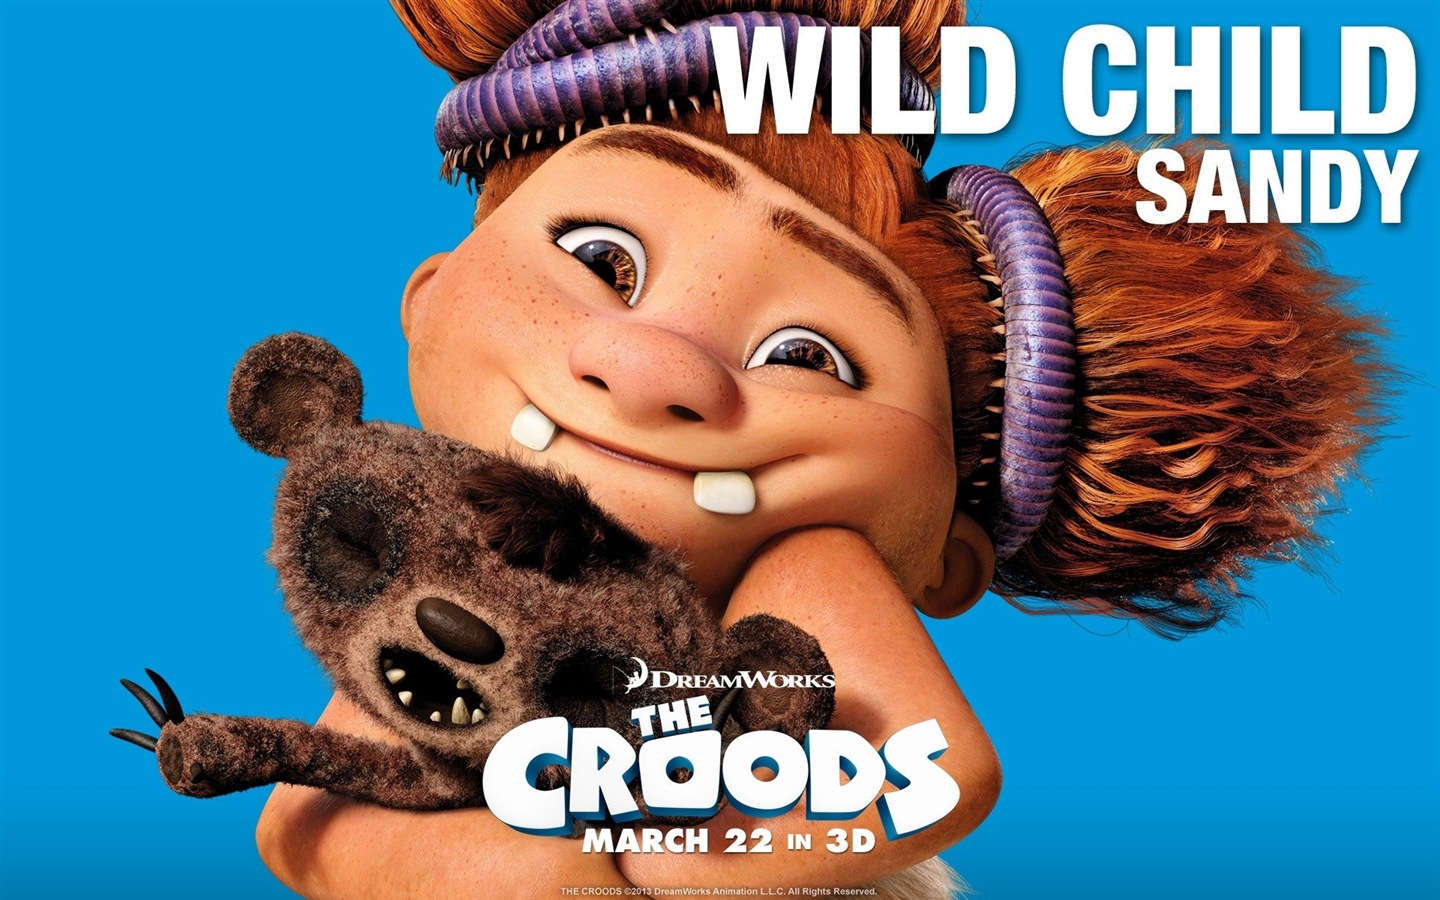 V Croods HD Movie Wallpapers #9 - 1440x900